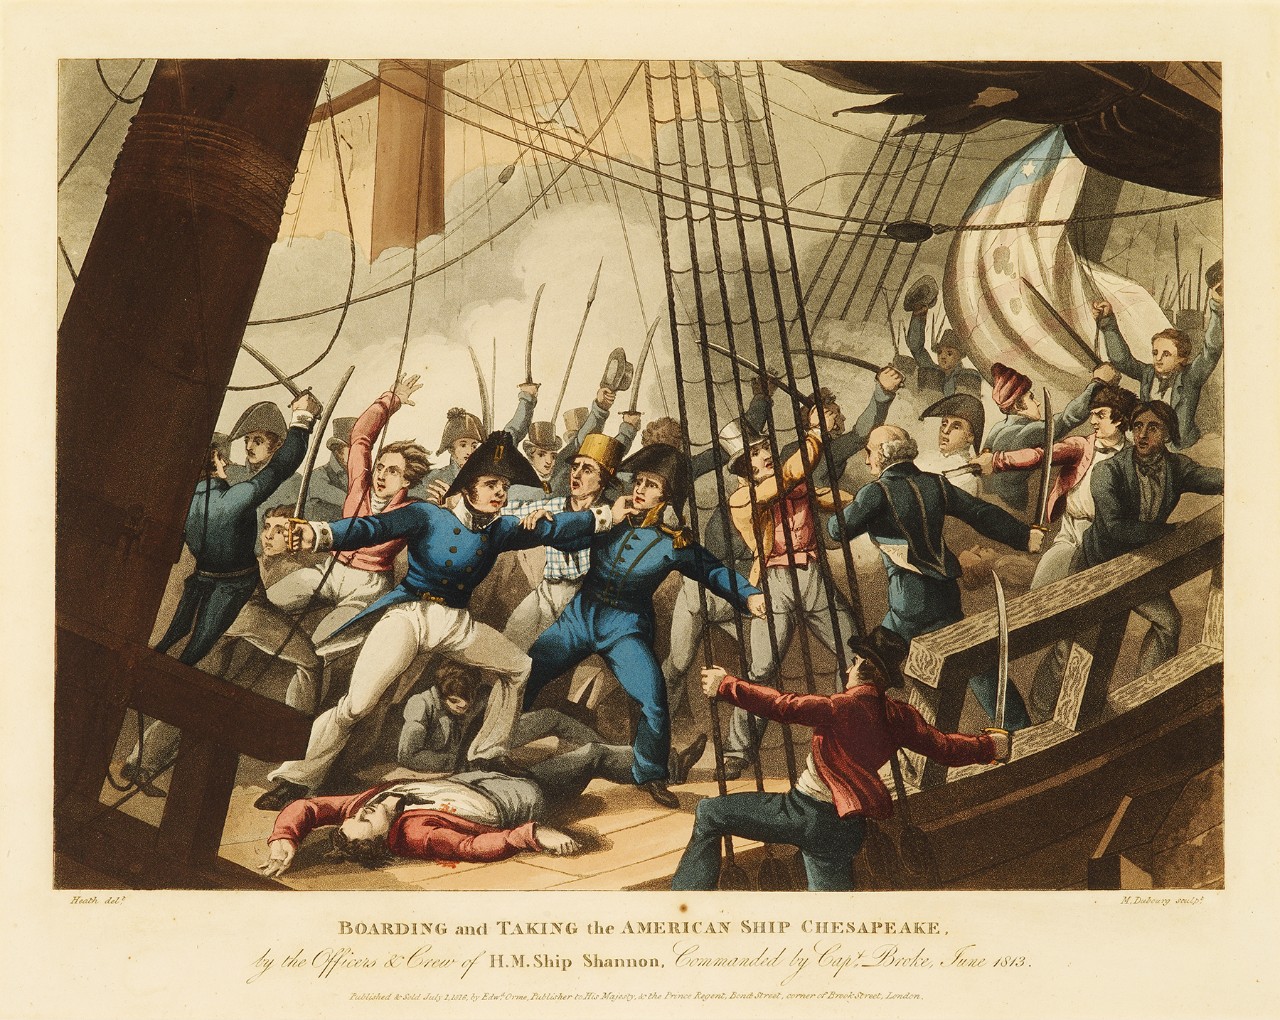 A furious battle of the deck of a ship. In center two officers battle with swords, there is smoke obscuring the deck as men fight.